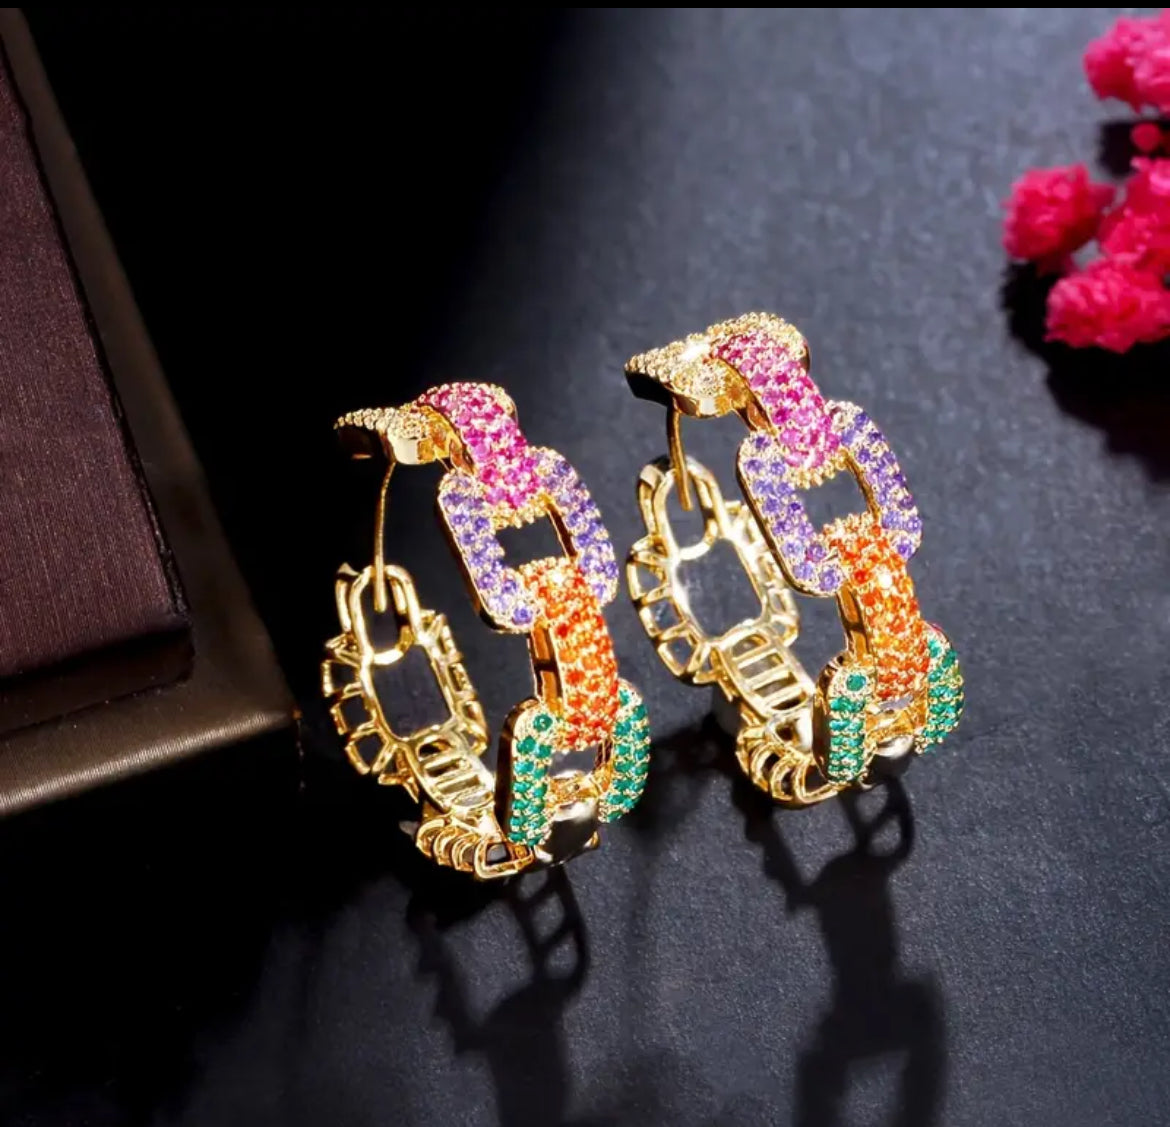 Colorful Exquisite Chain Design Hoop Earrings 18K Gold Plated Jewelry Zircon